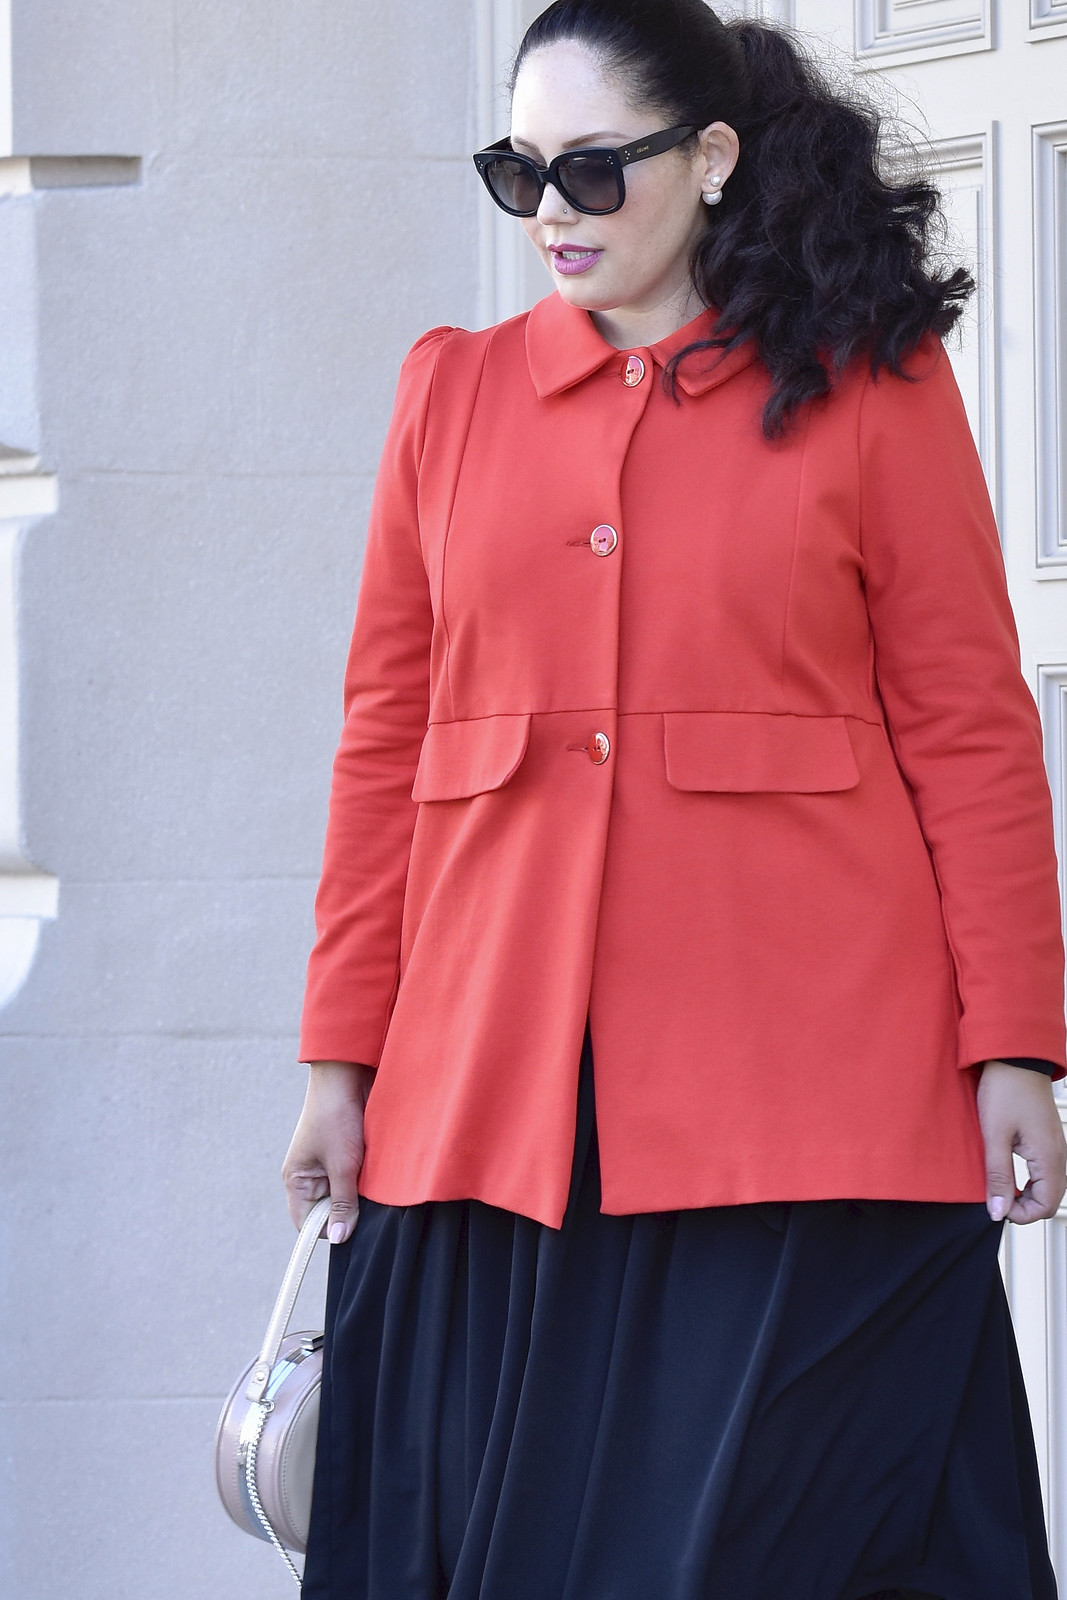 Girl With Curves Collection Tailored A Line Red Jacket #GirlWithCurves #collection #coat #jacket #longsleeve #plussize #curvy #fashion #stylish #modest #Tanesha